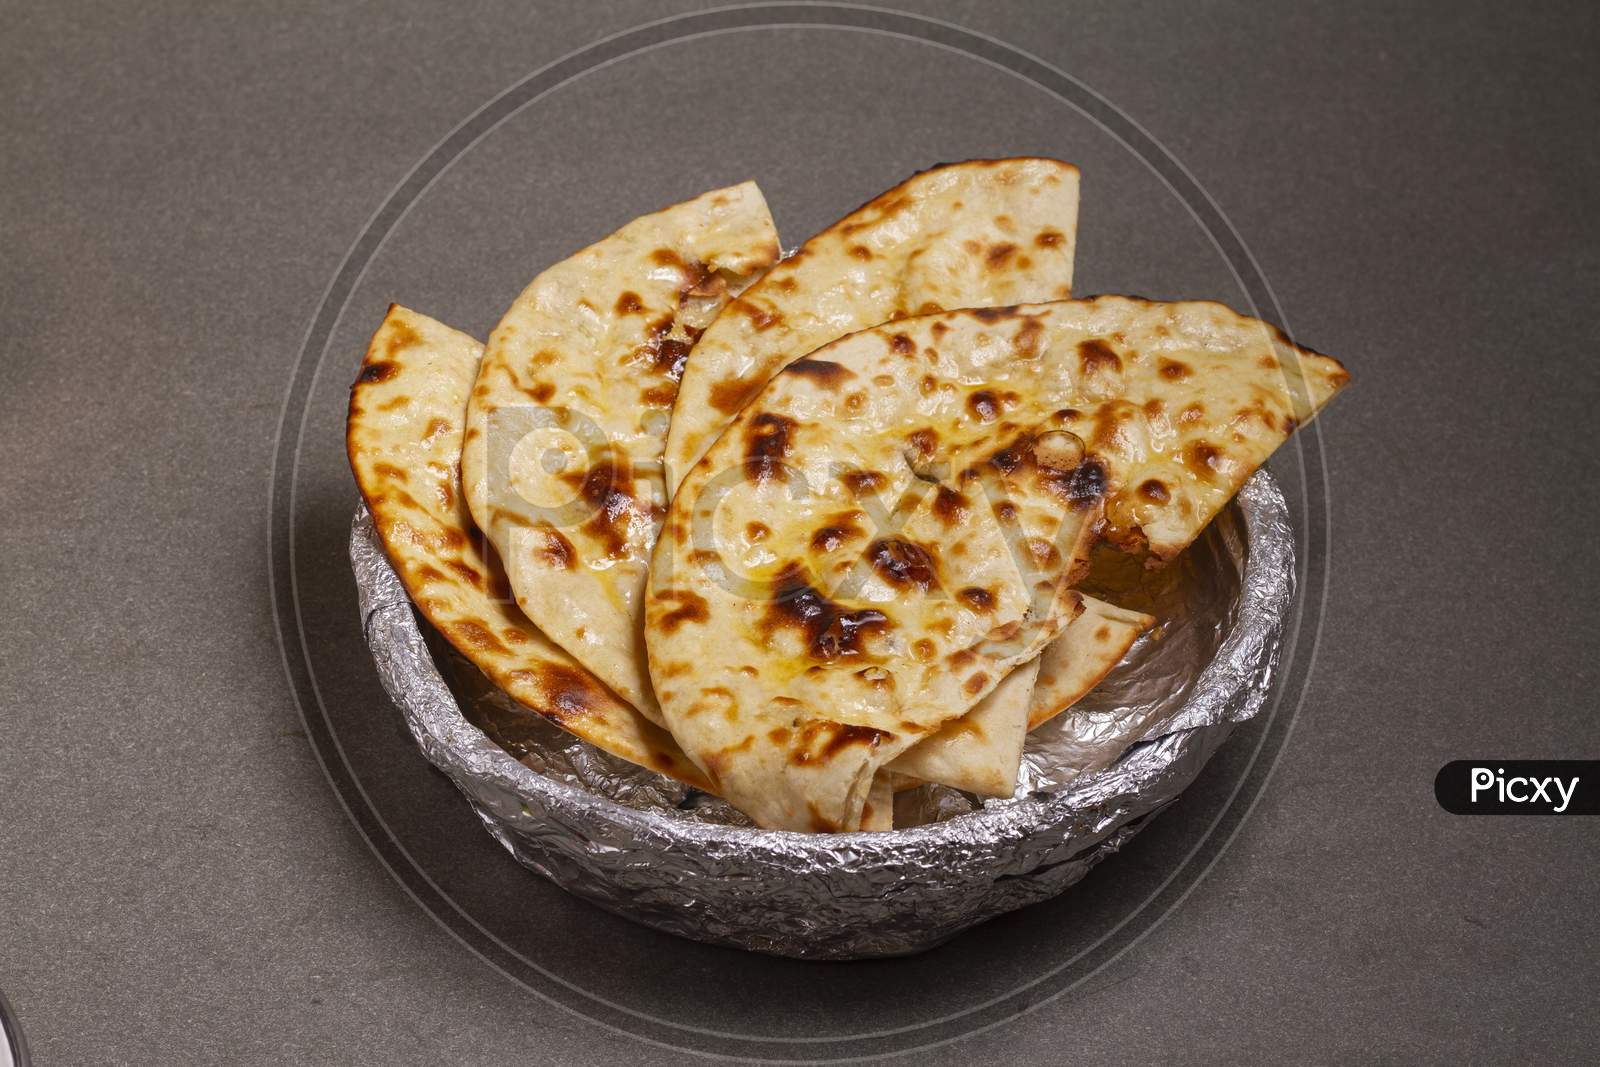 Indian Cuisine Tandoori Roti Also Served In Basket Including Chapati, Flatbread, Naan Or Nan Bread On Wooden Background